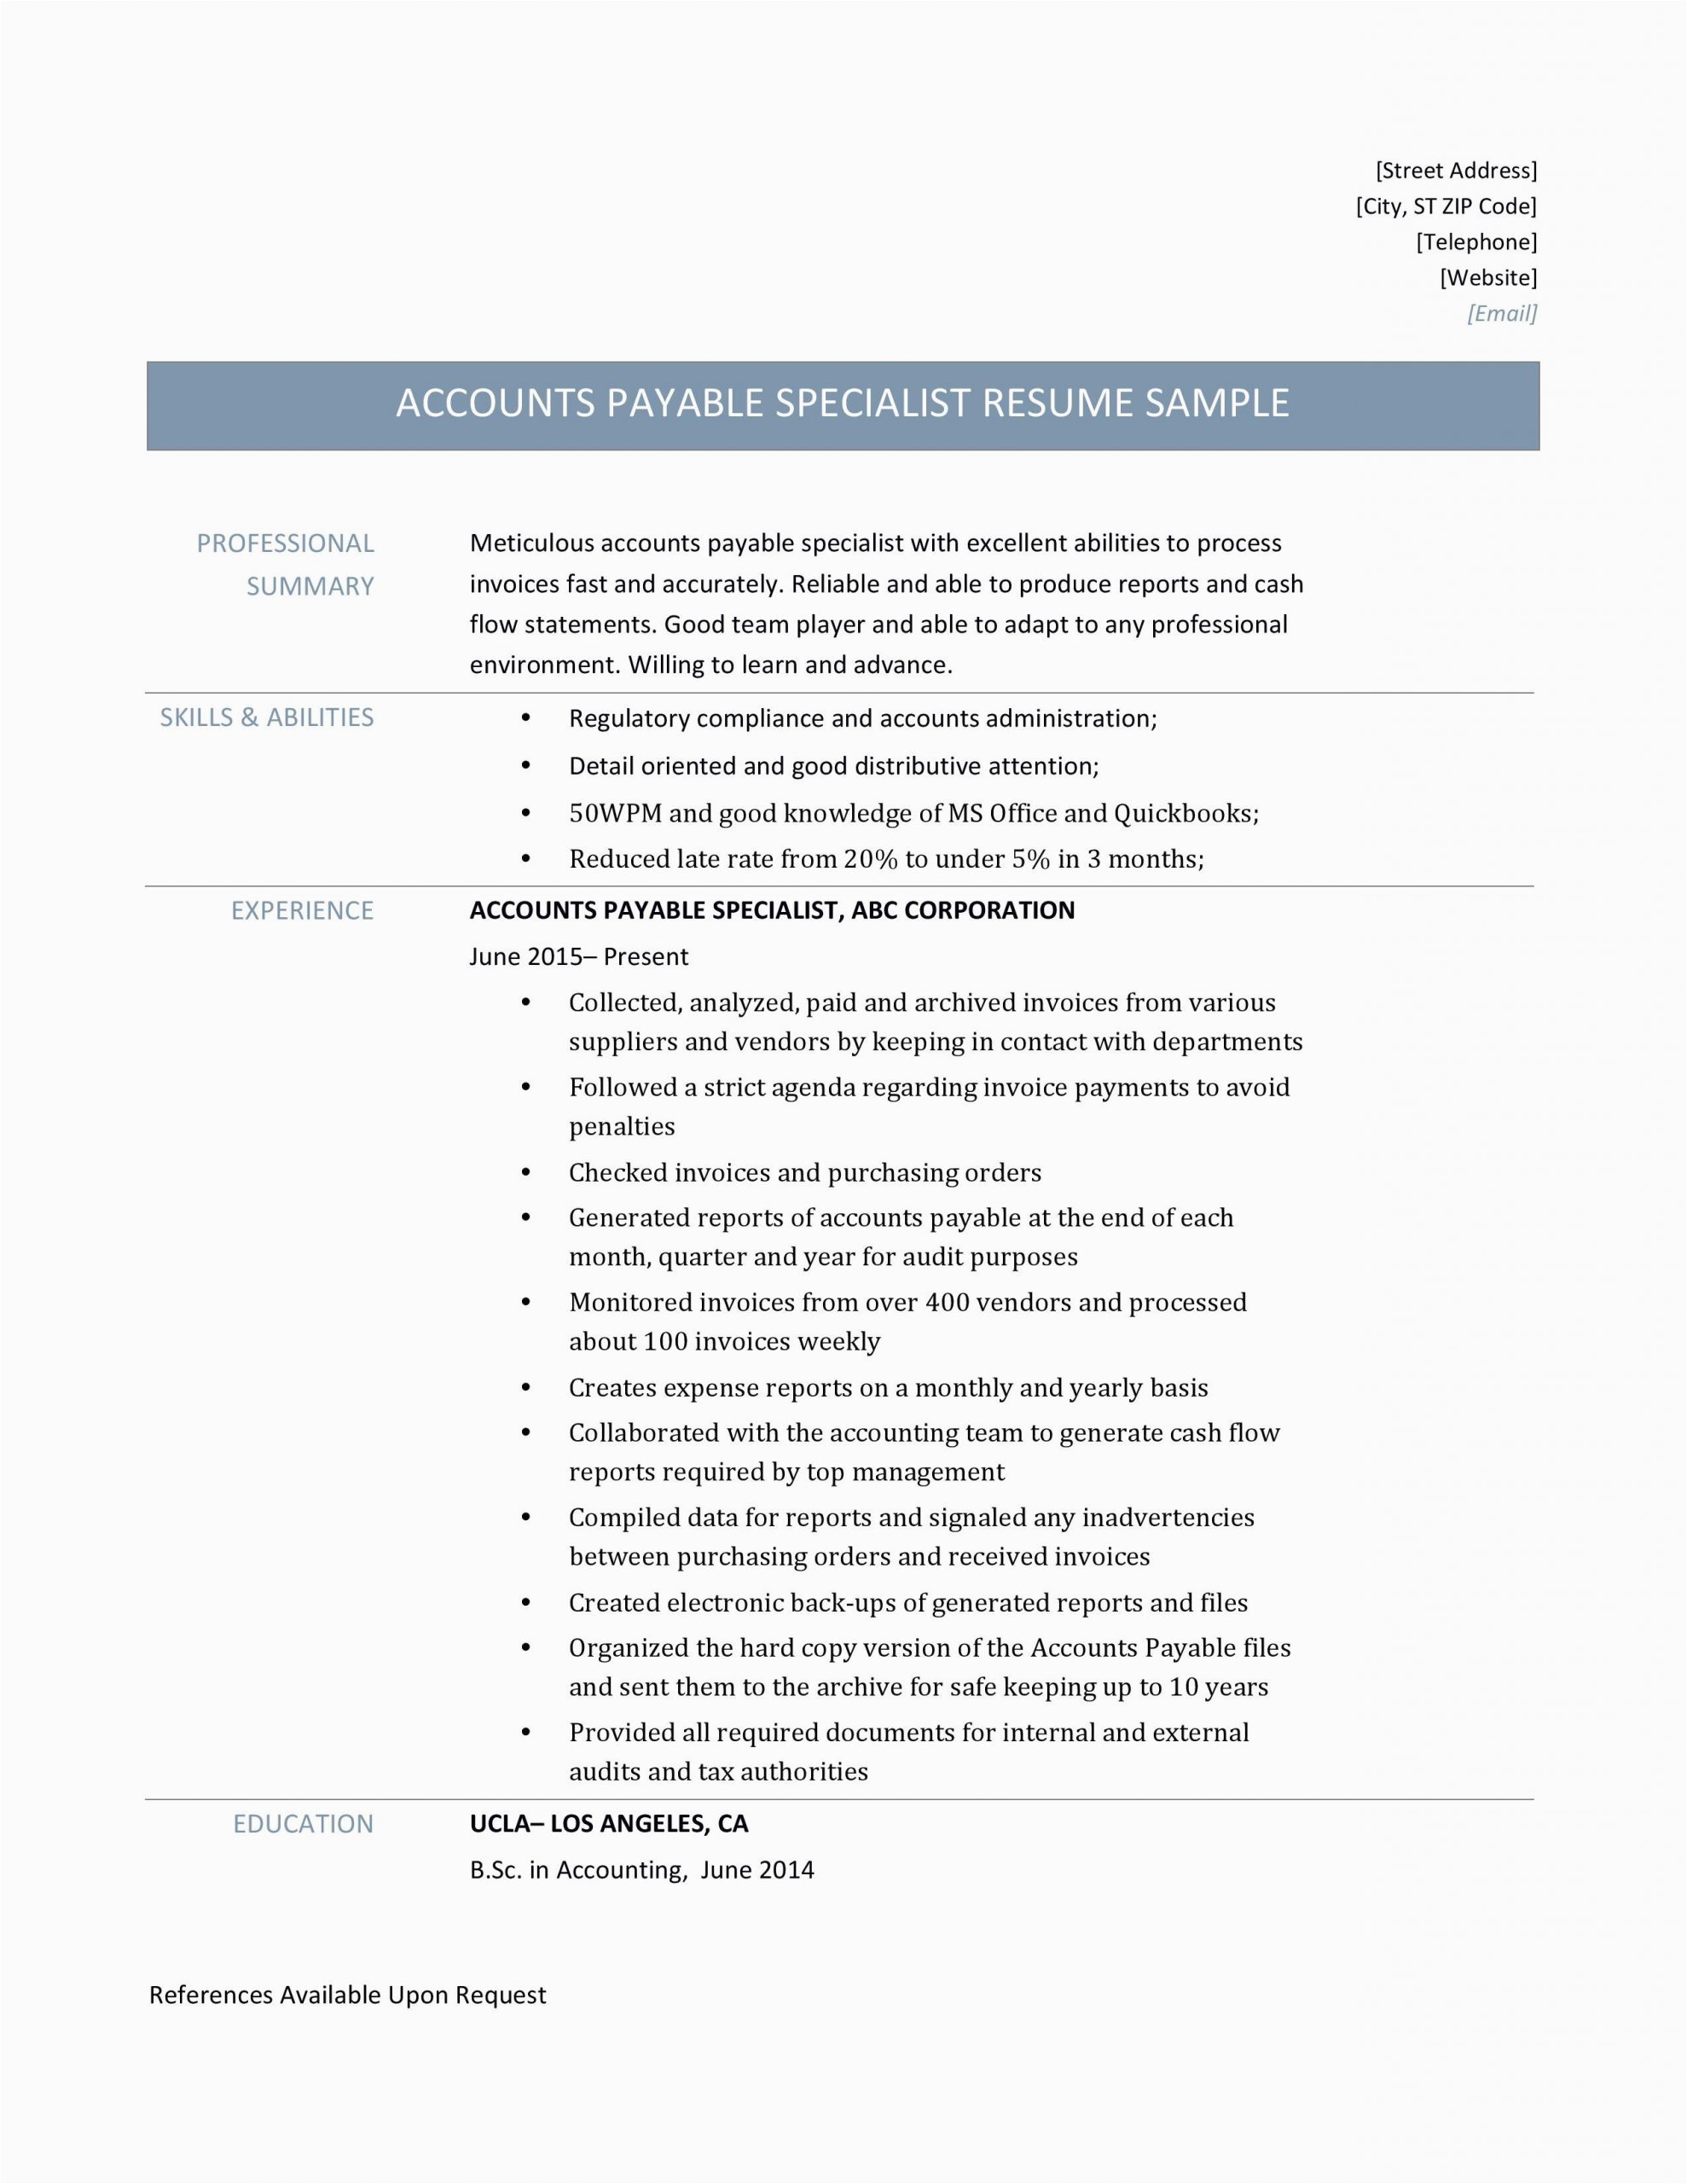 Sample Resume for Accounts Payable Specialist Accounts Payable Specialist Resume Samples Line Resume